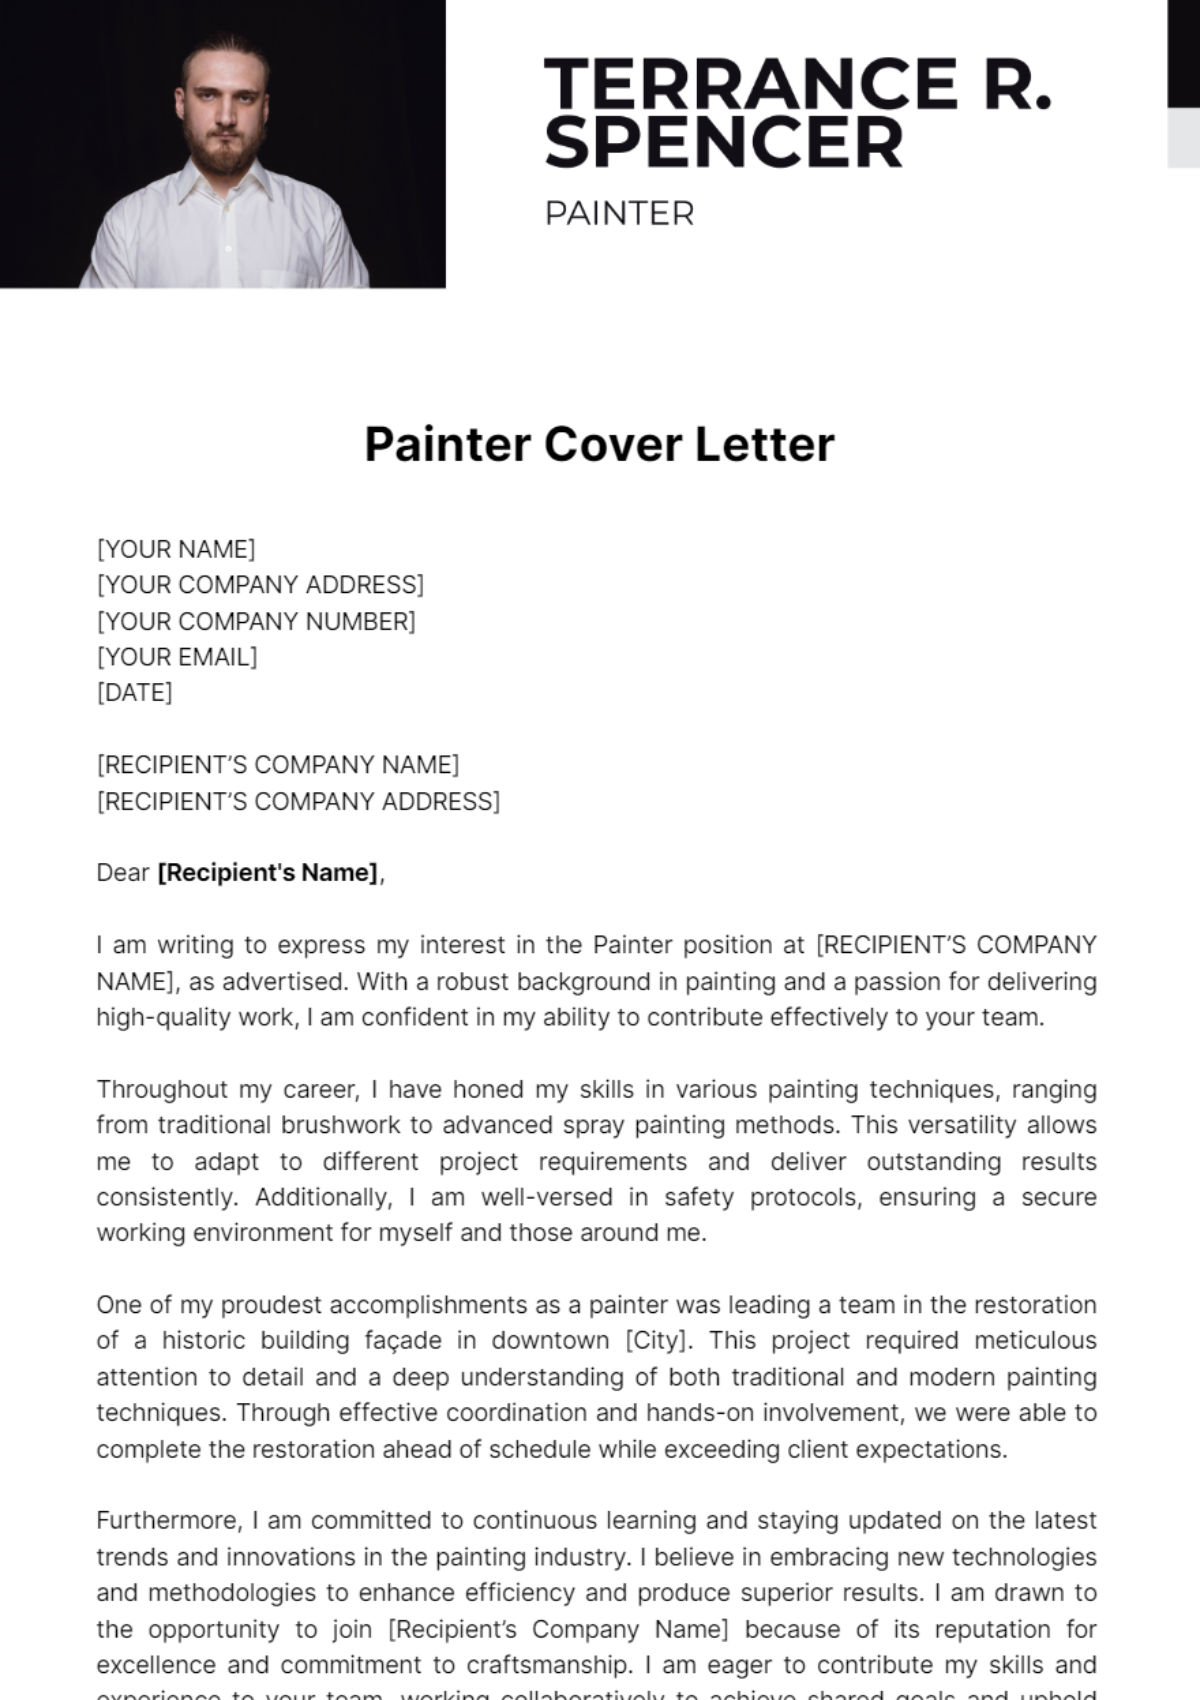 Painter Cover Letter Template